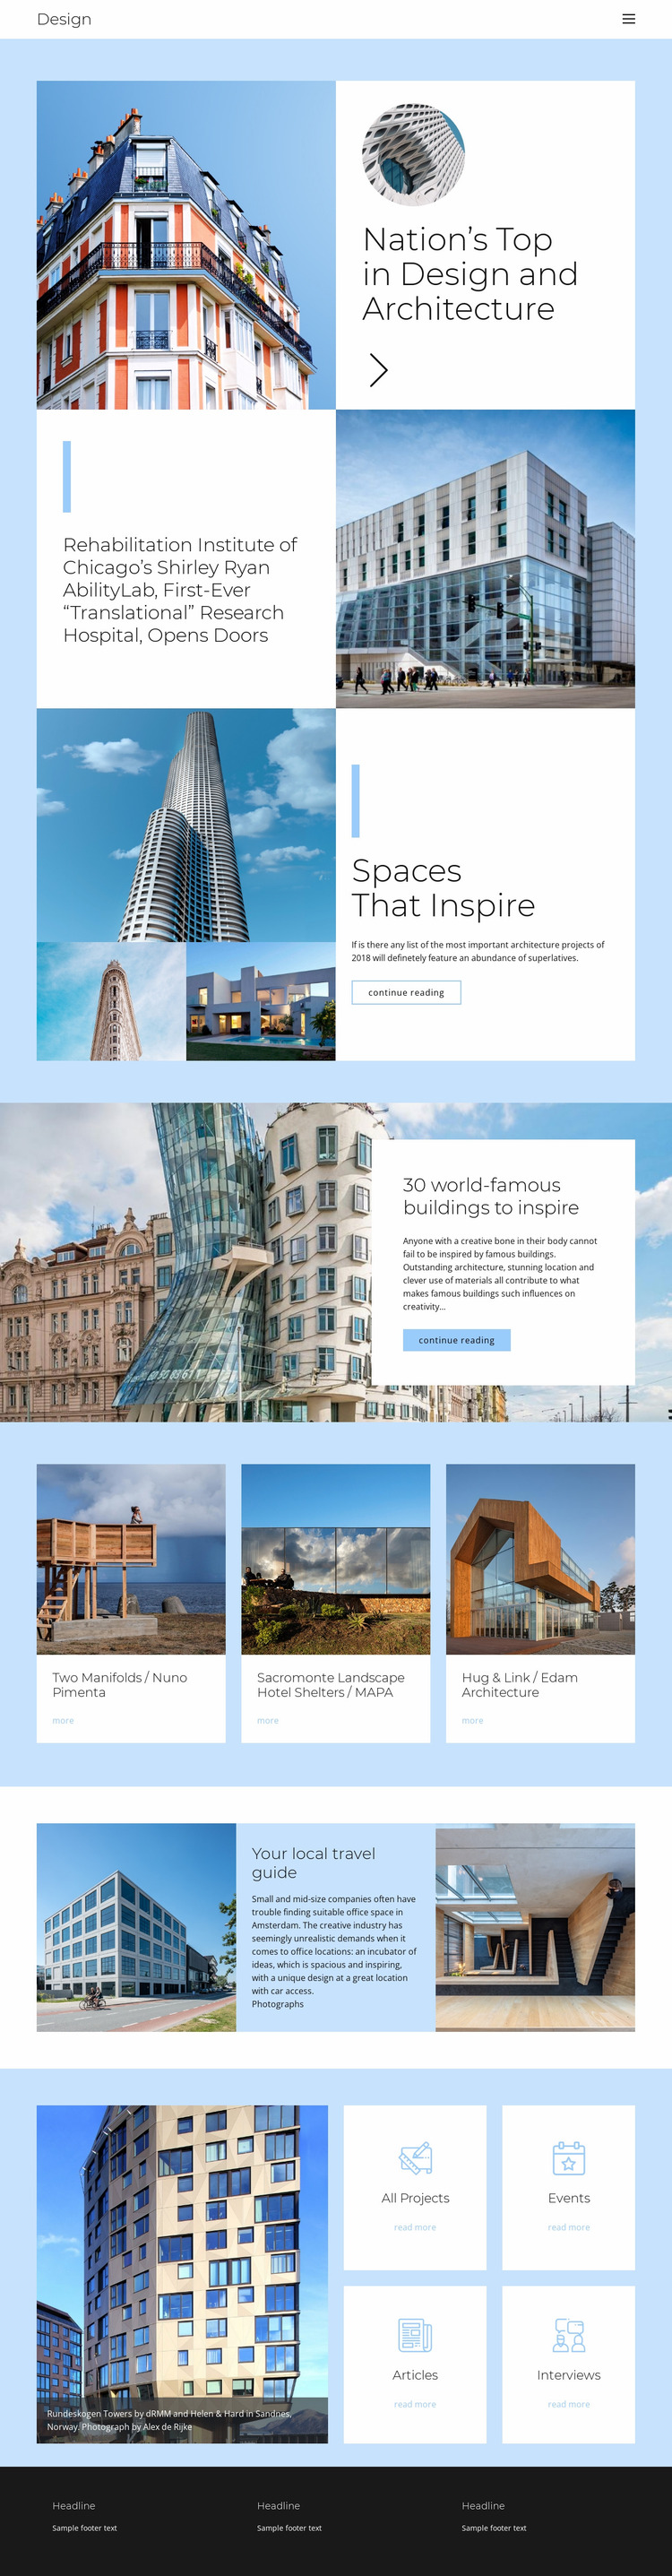 Architecture city guide Website Mockup